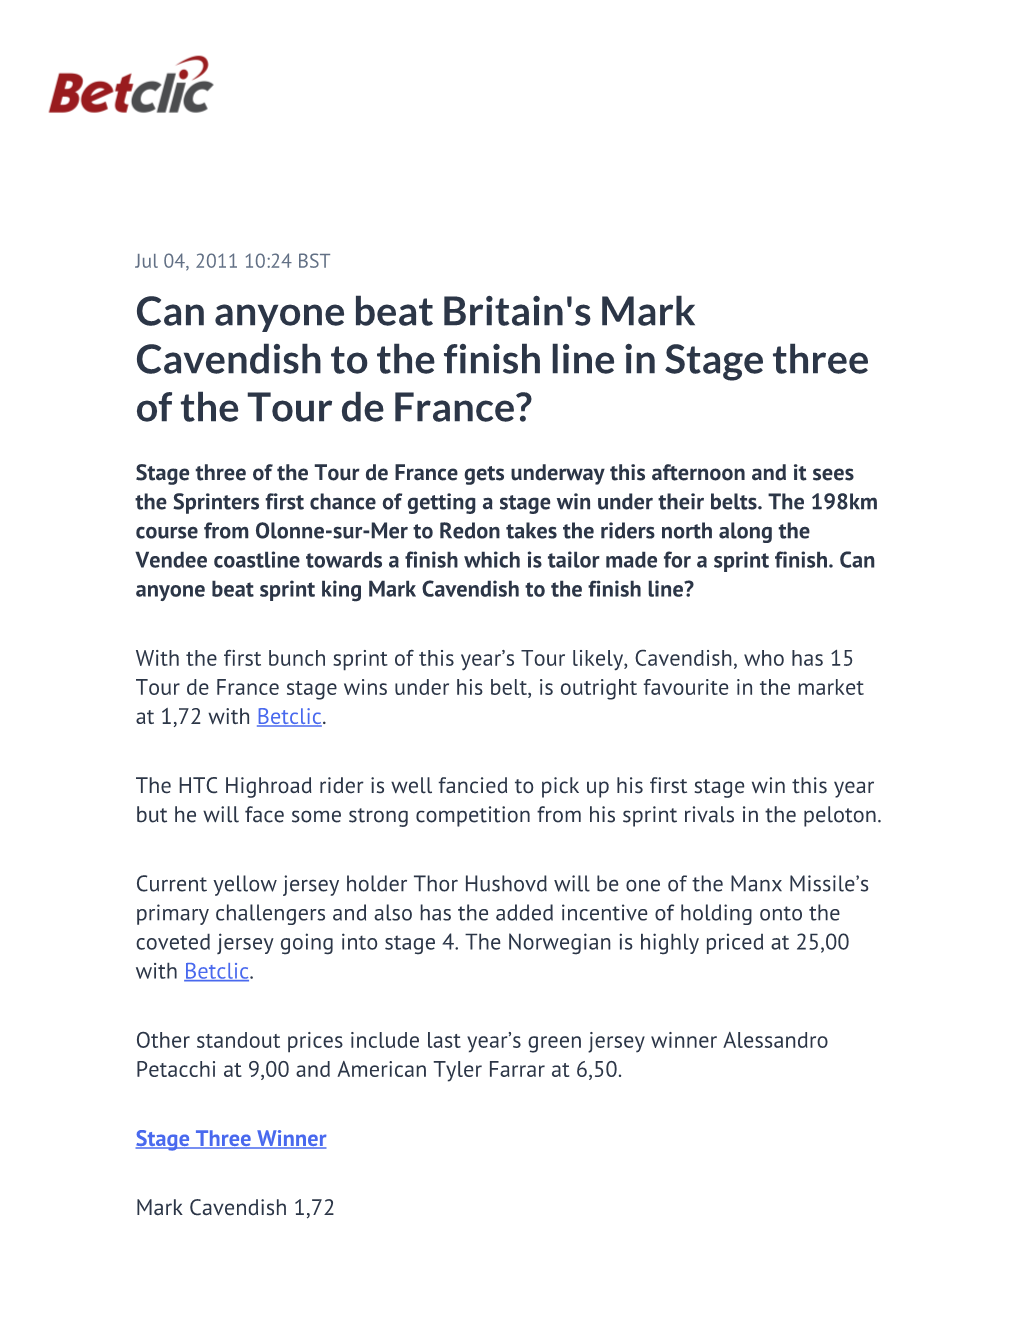 Can Anyone Beat Britain's Mark Cavendish to the Finish Line in Stage Three of the Tour De France?